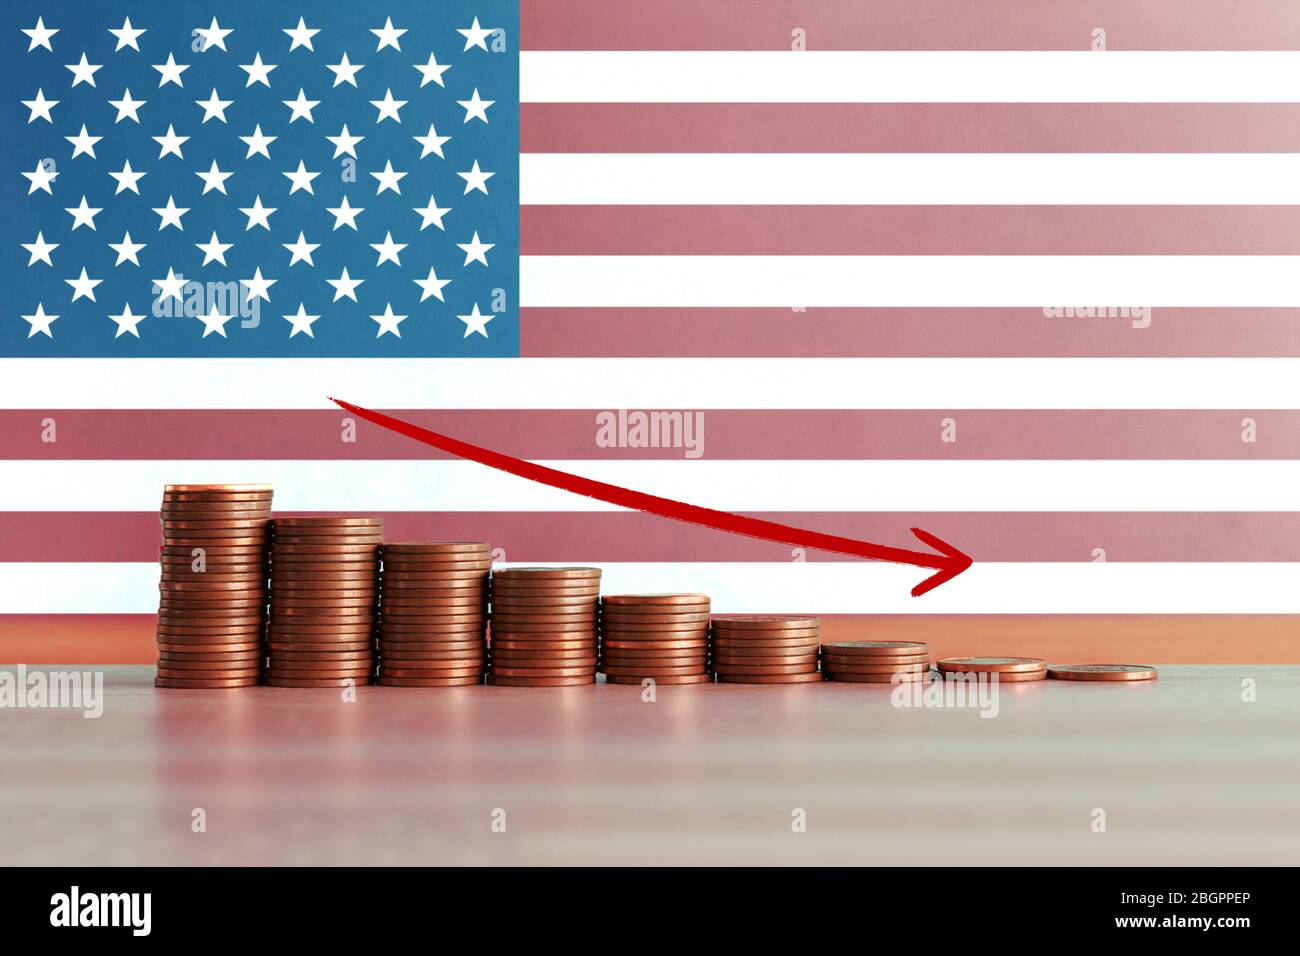 Stock photo of economic crisis and recession concept in the USA with descending staircase of coins and flag in background Stock Photo